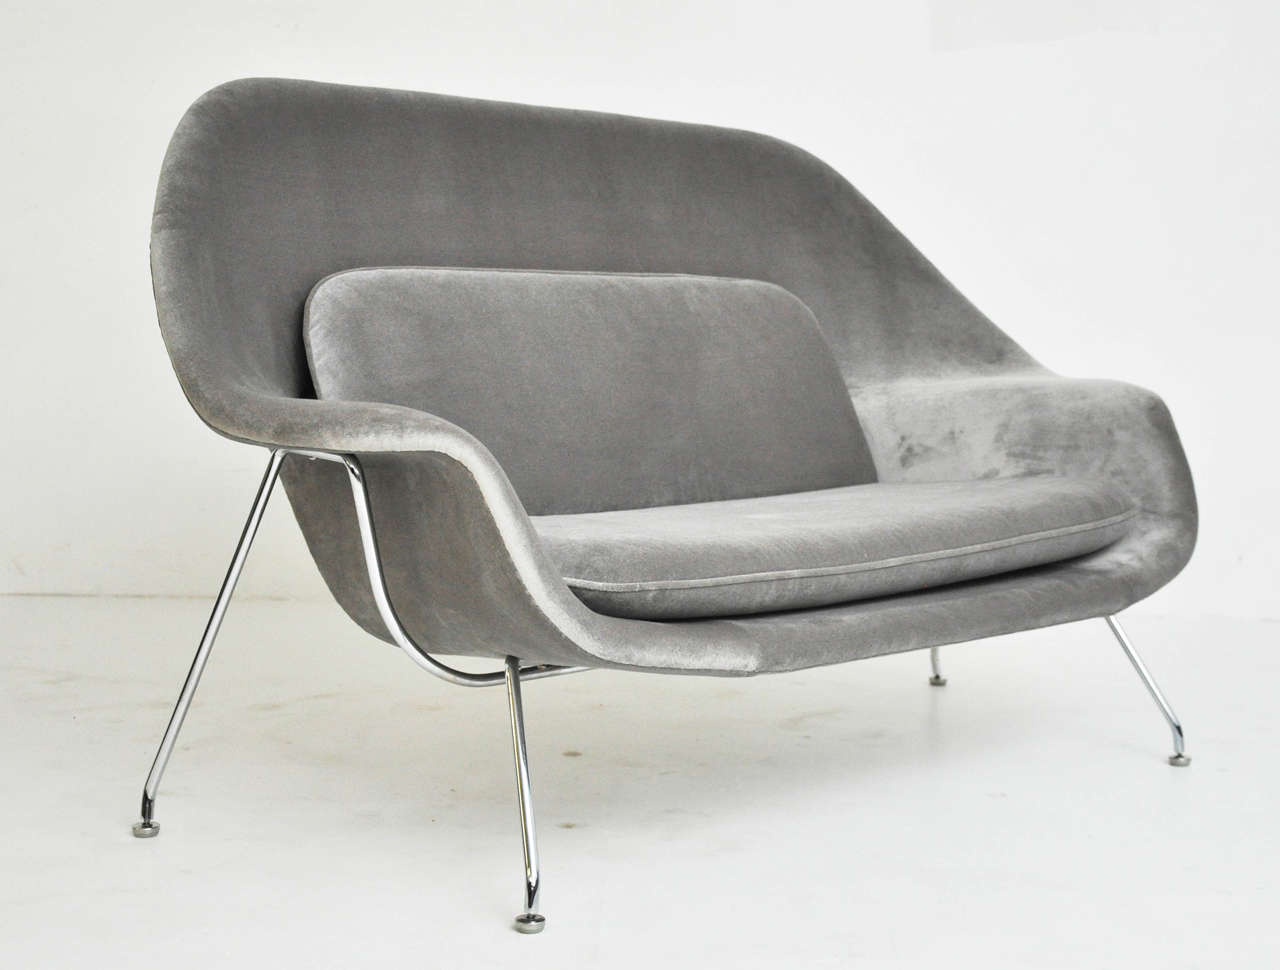 Womb settee sofa designed by Eero Saarinen for Knoll, circa 1960. Fully restored and reupholstered in grey velvet.